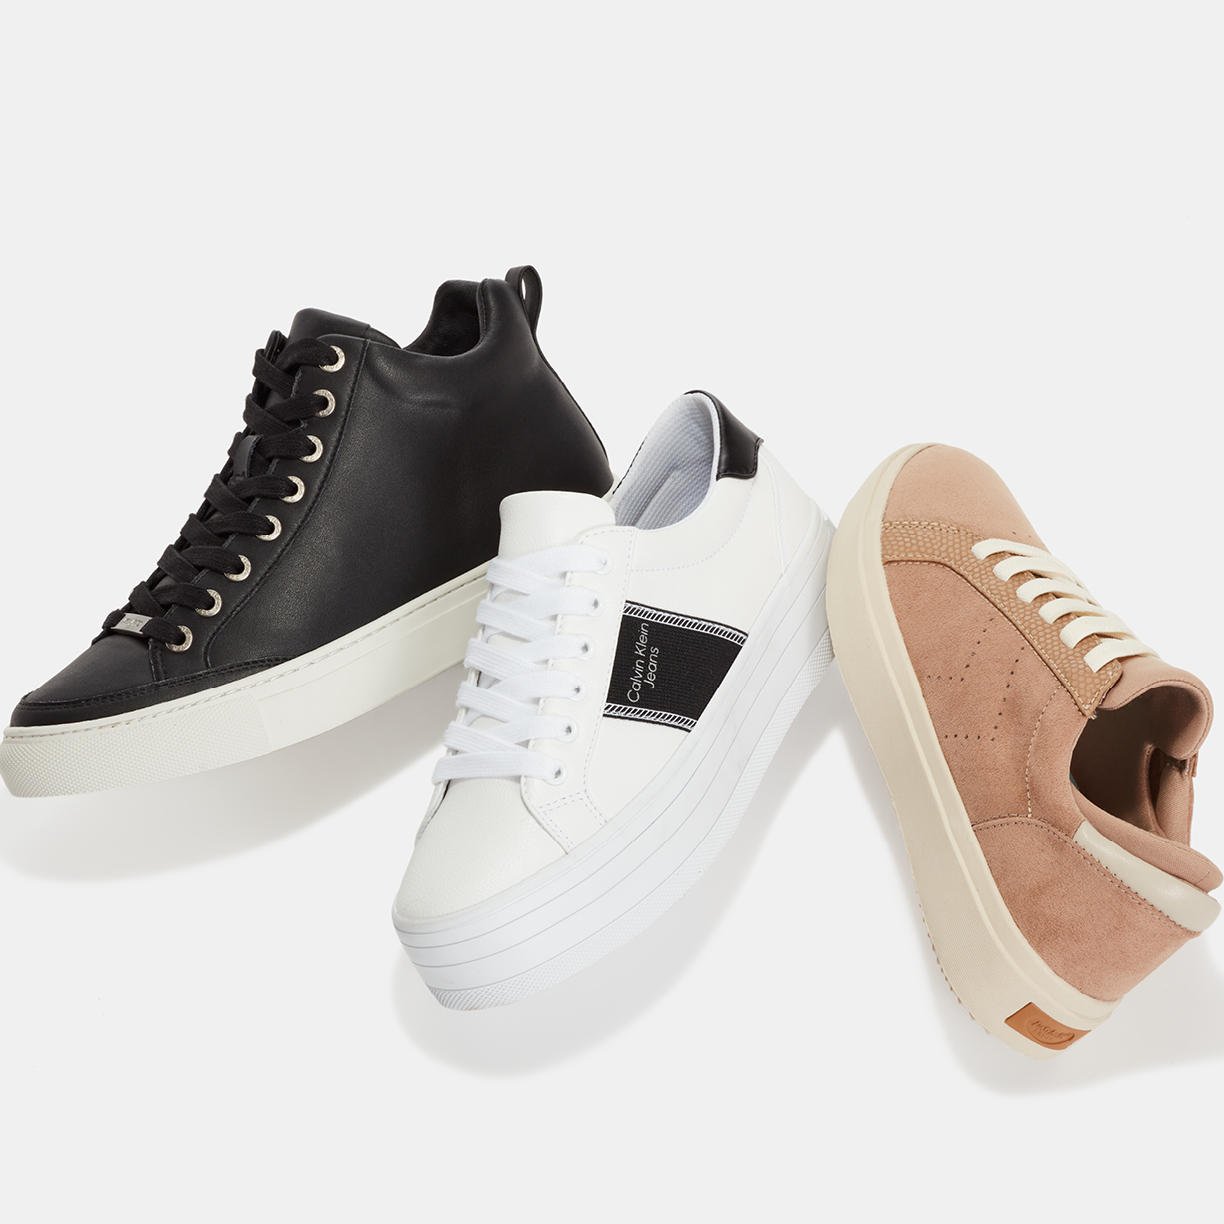 Shoe Shop: Casual Sneakers for the Fam